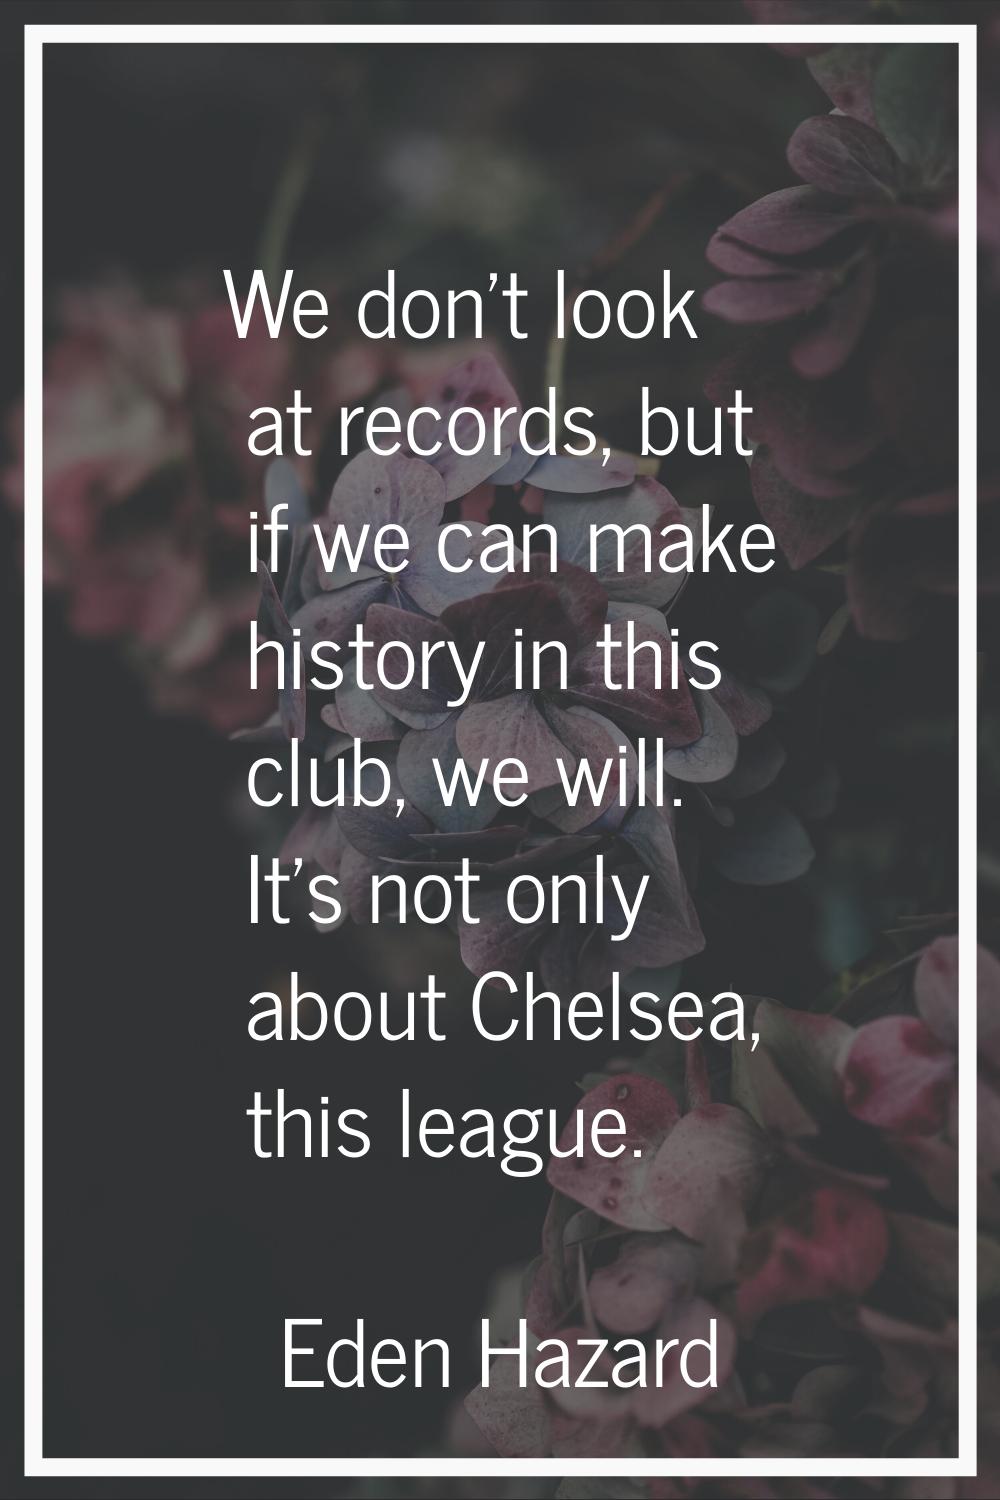 We don't look at records, but if we can make history in this club, we will. It's not only about Che